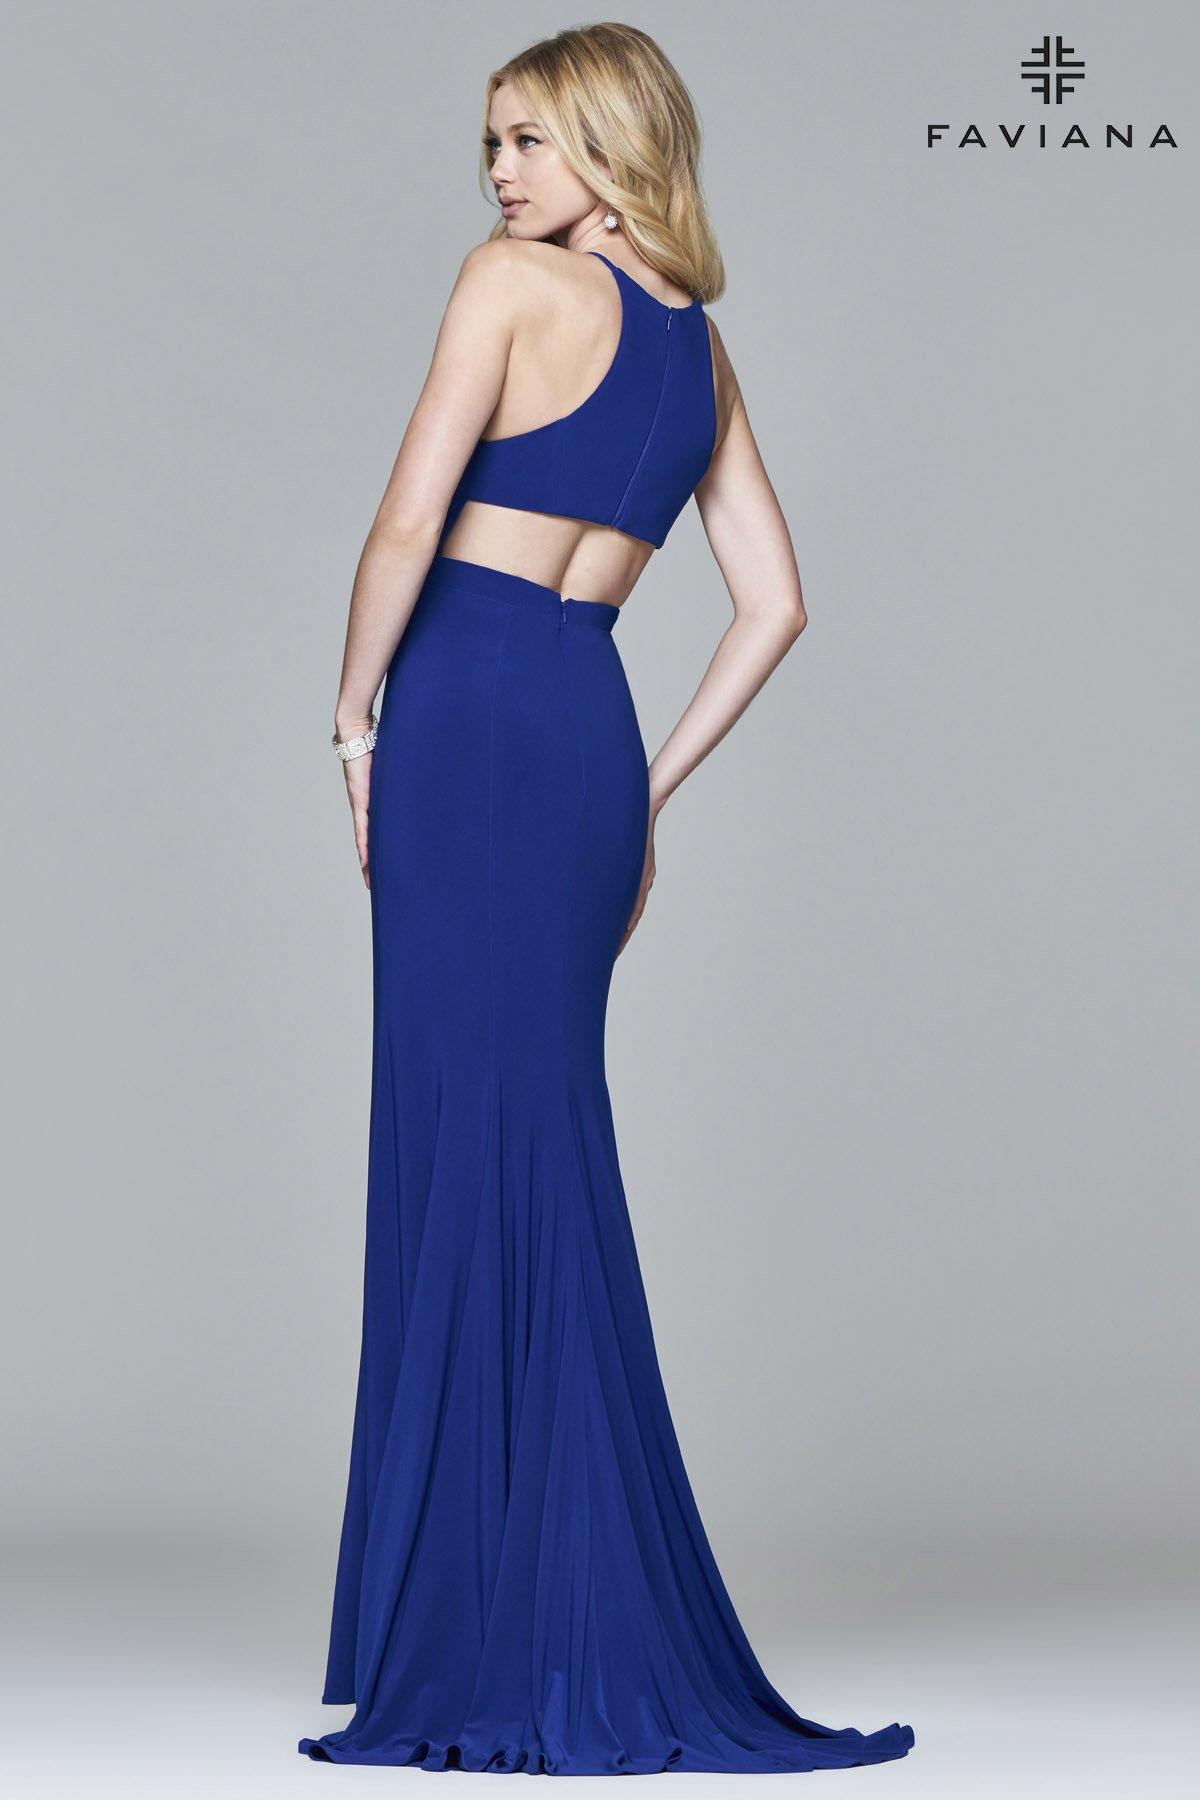 Faviana 7976 Long Fitted Jersey Gown - The Dress Outlet Faviana